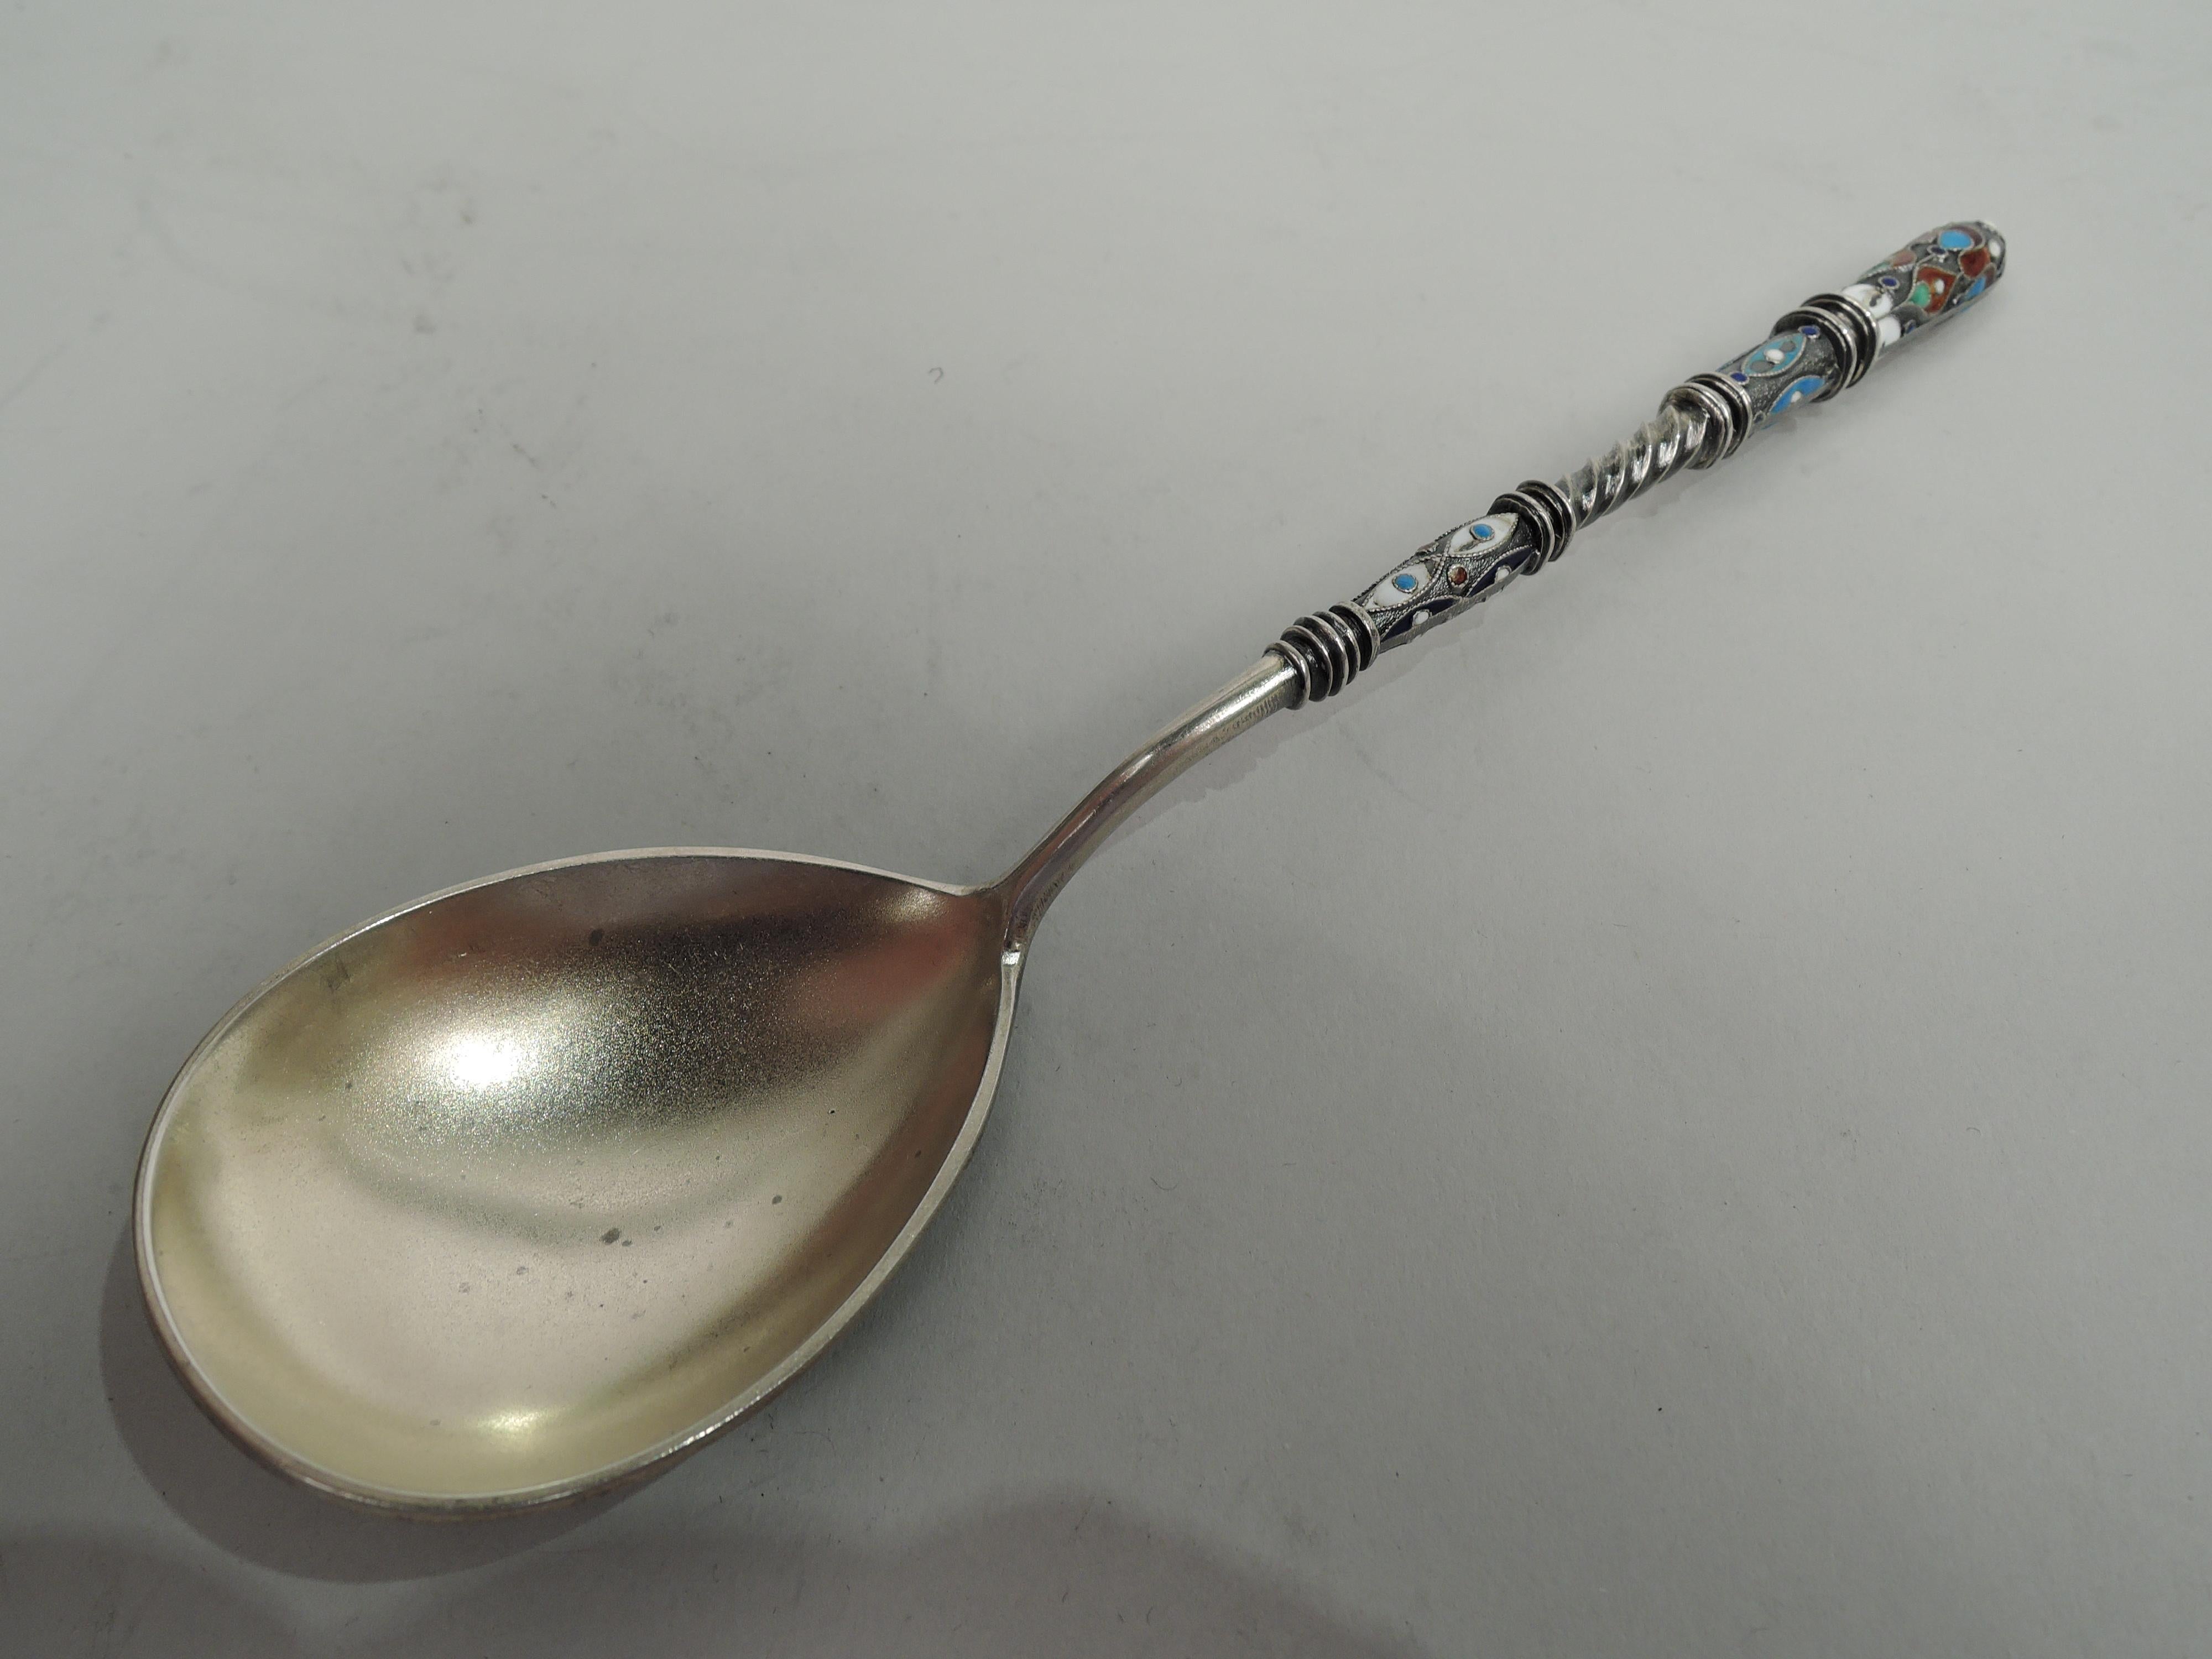 Scandinavian Arts & Crafts silver gilt and enamel spoon. Made by Marius Hammer, circa 1930. Twisted and knopped shaft and oval bowl. Stylized enameled ornament, including flowers, scrollwork, and beading, on shaft and bowl verso. Fully marked “900”